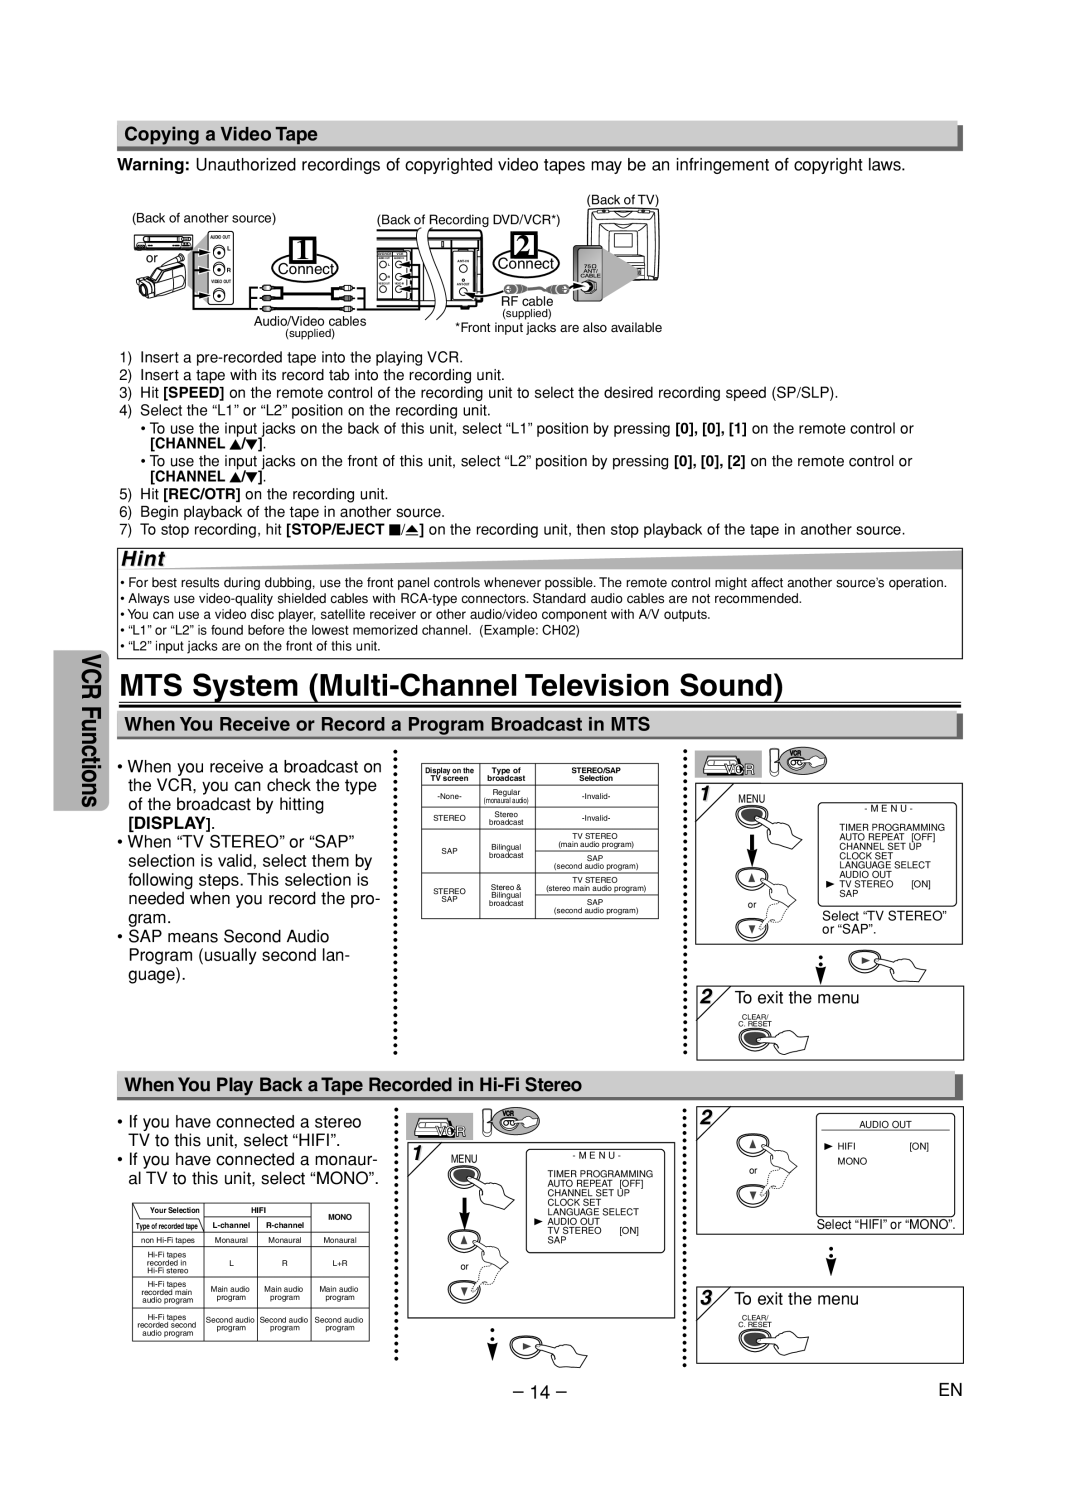 Sylvania DVC860F owner manual MTS System Multi-Channel Television Sound, Copying a Video Tape 